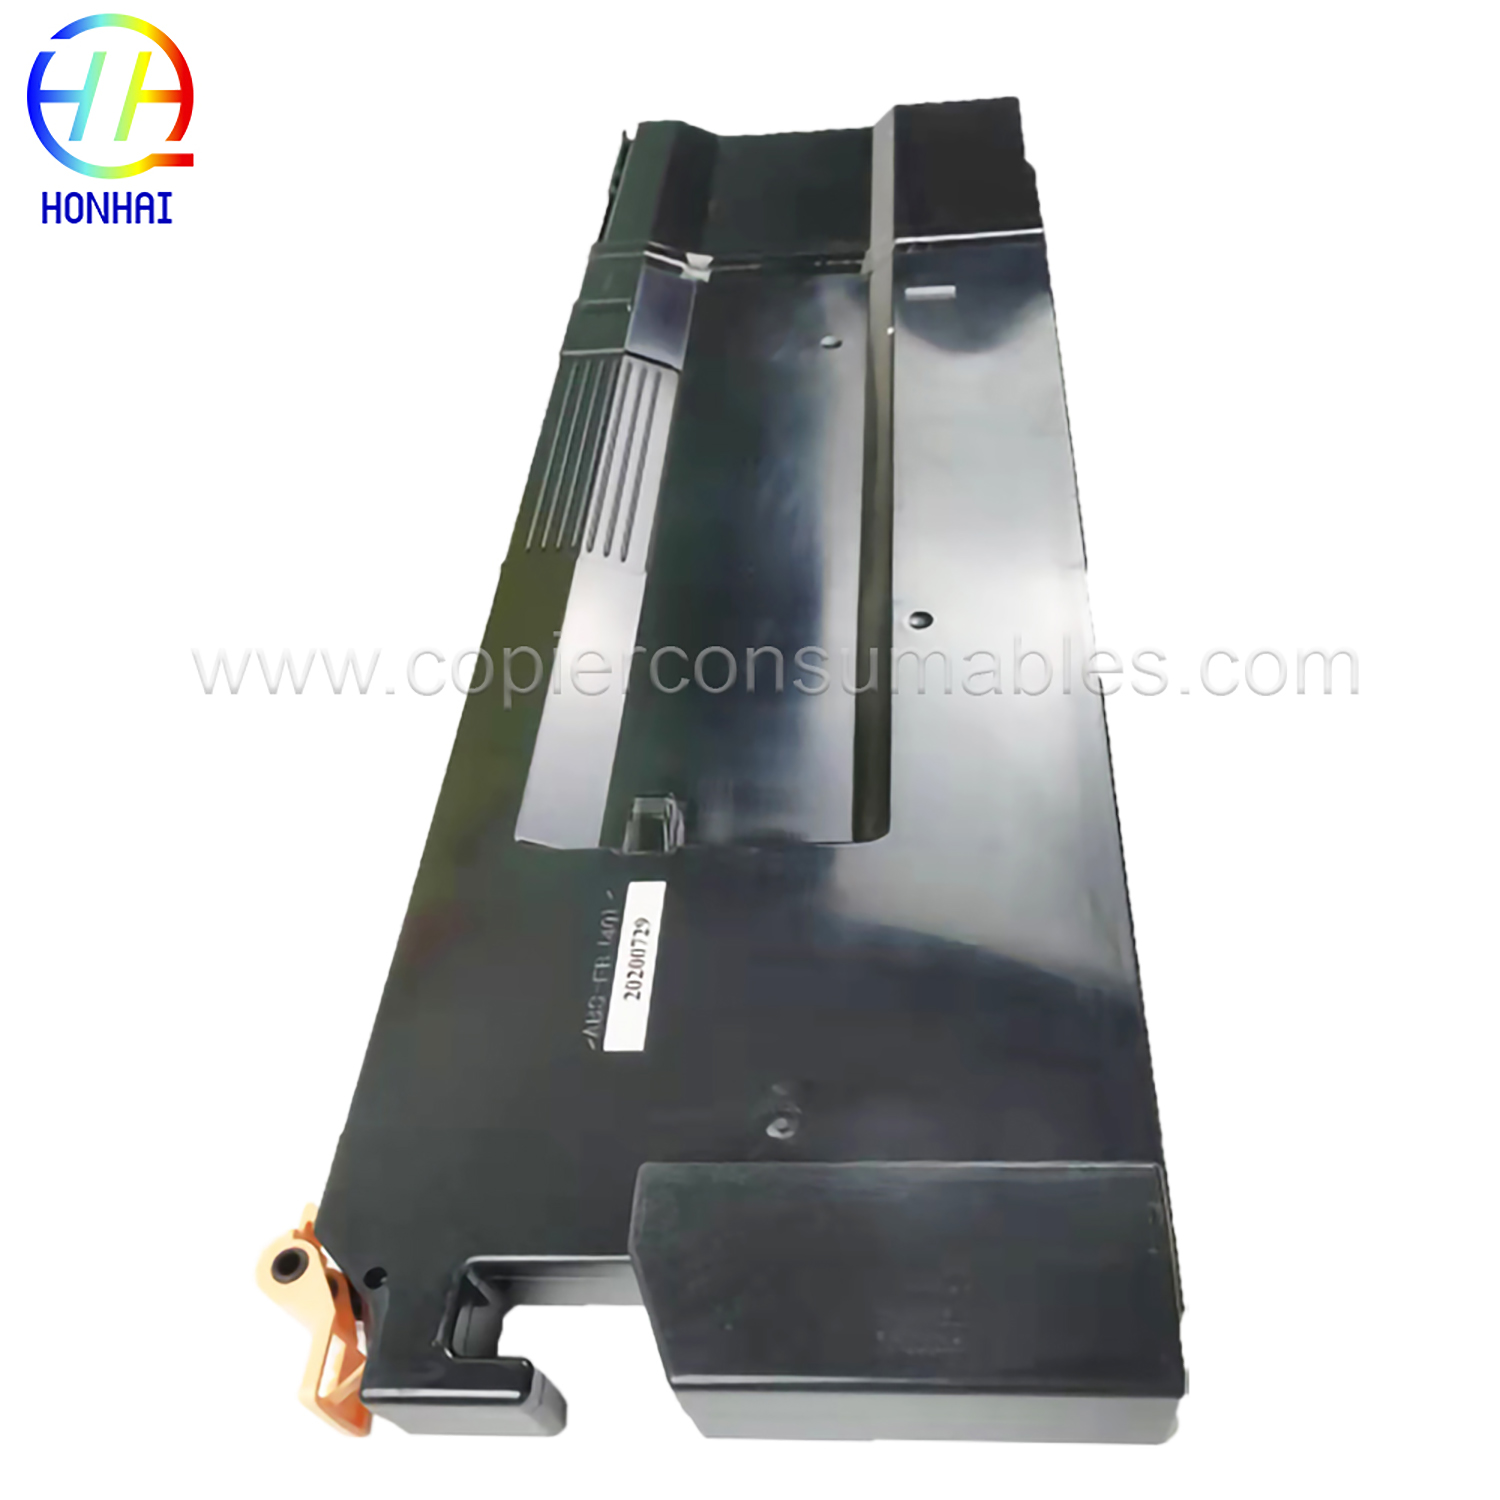 Waste Tone Container Original  for Xerox 4110 4127 4590 4595 D110 D125 D136 D95 ED125 ED95A  008R13036 (4) 拷贝